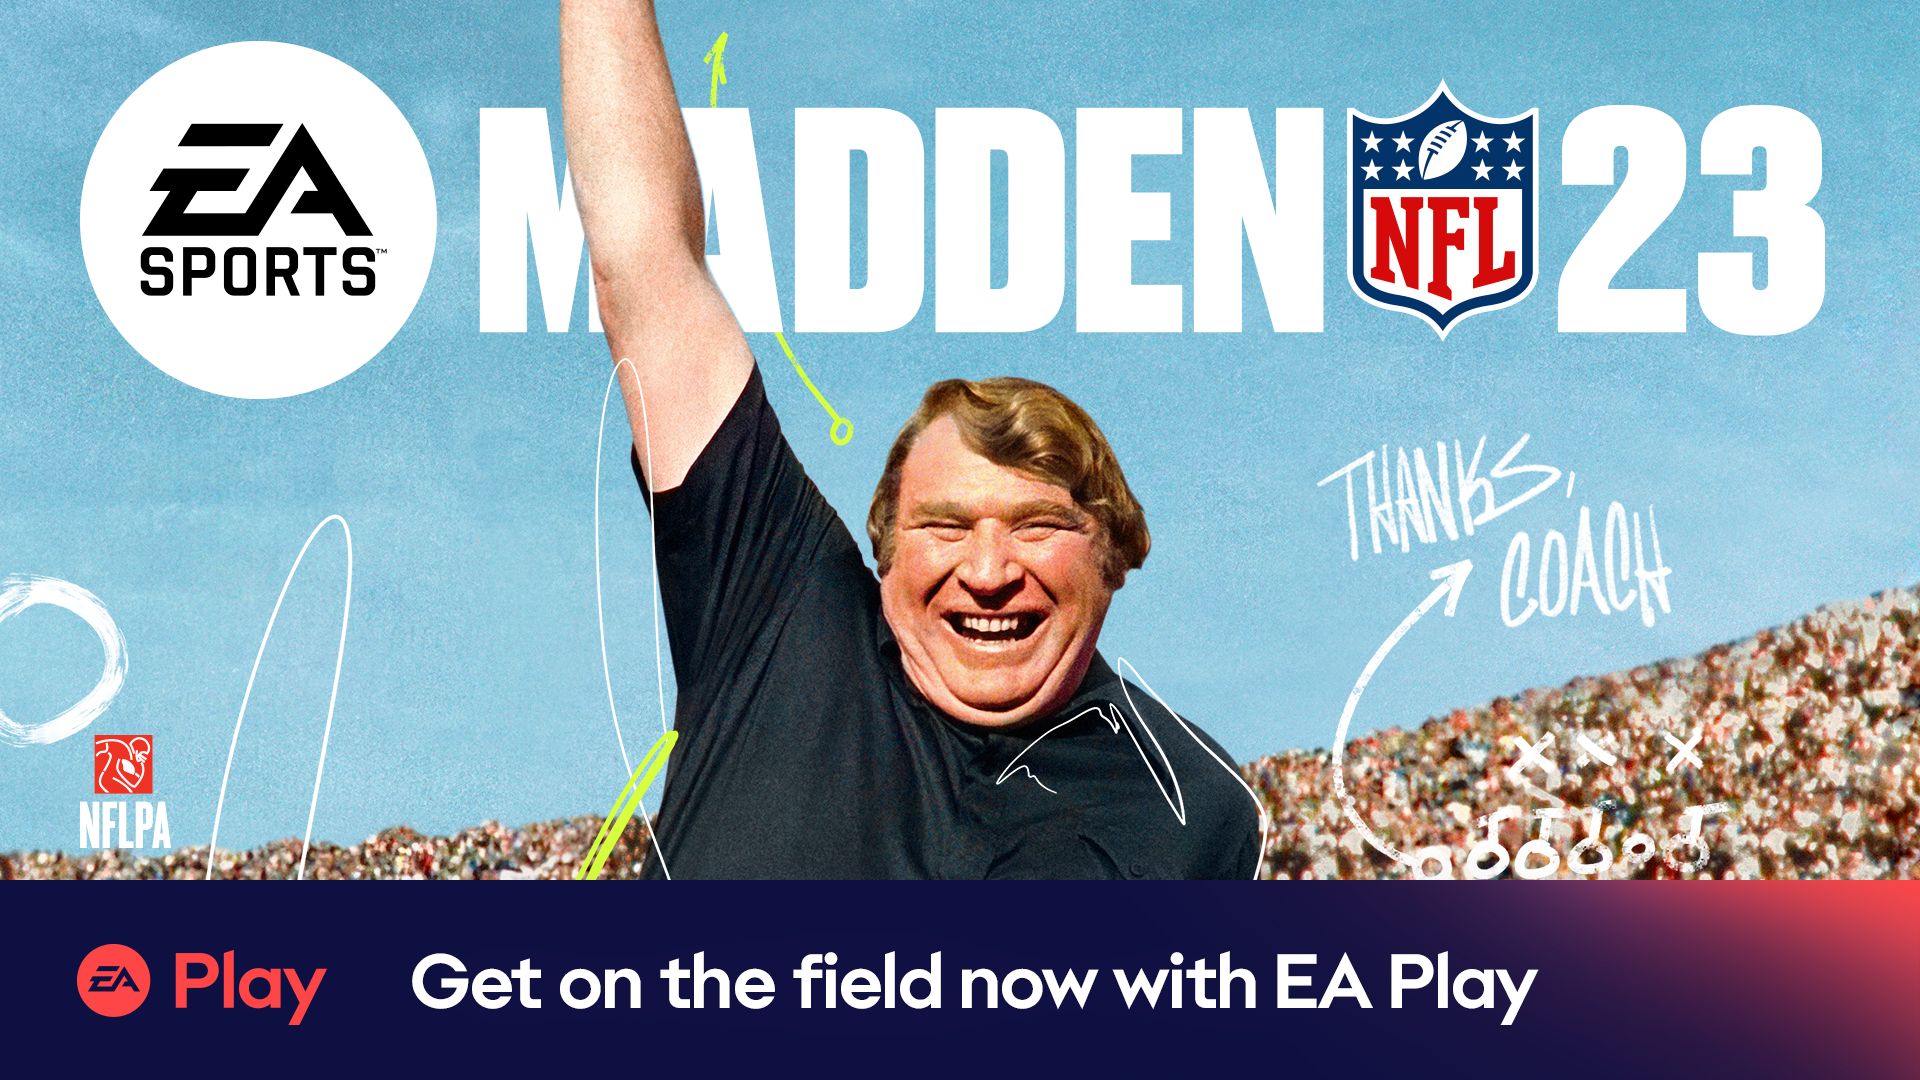 Madden NFL 23 early access